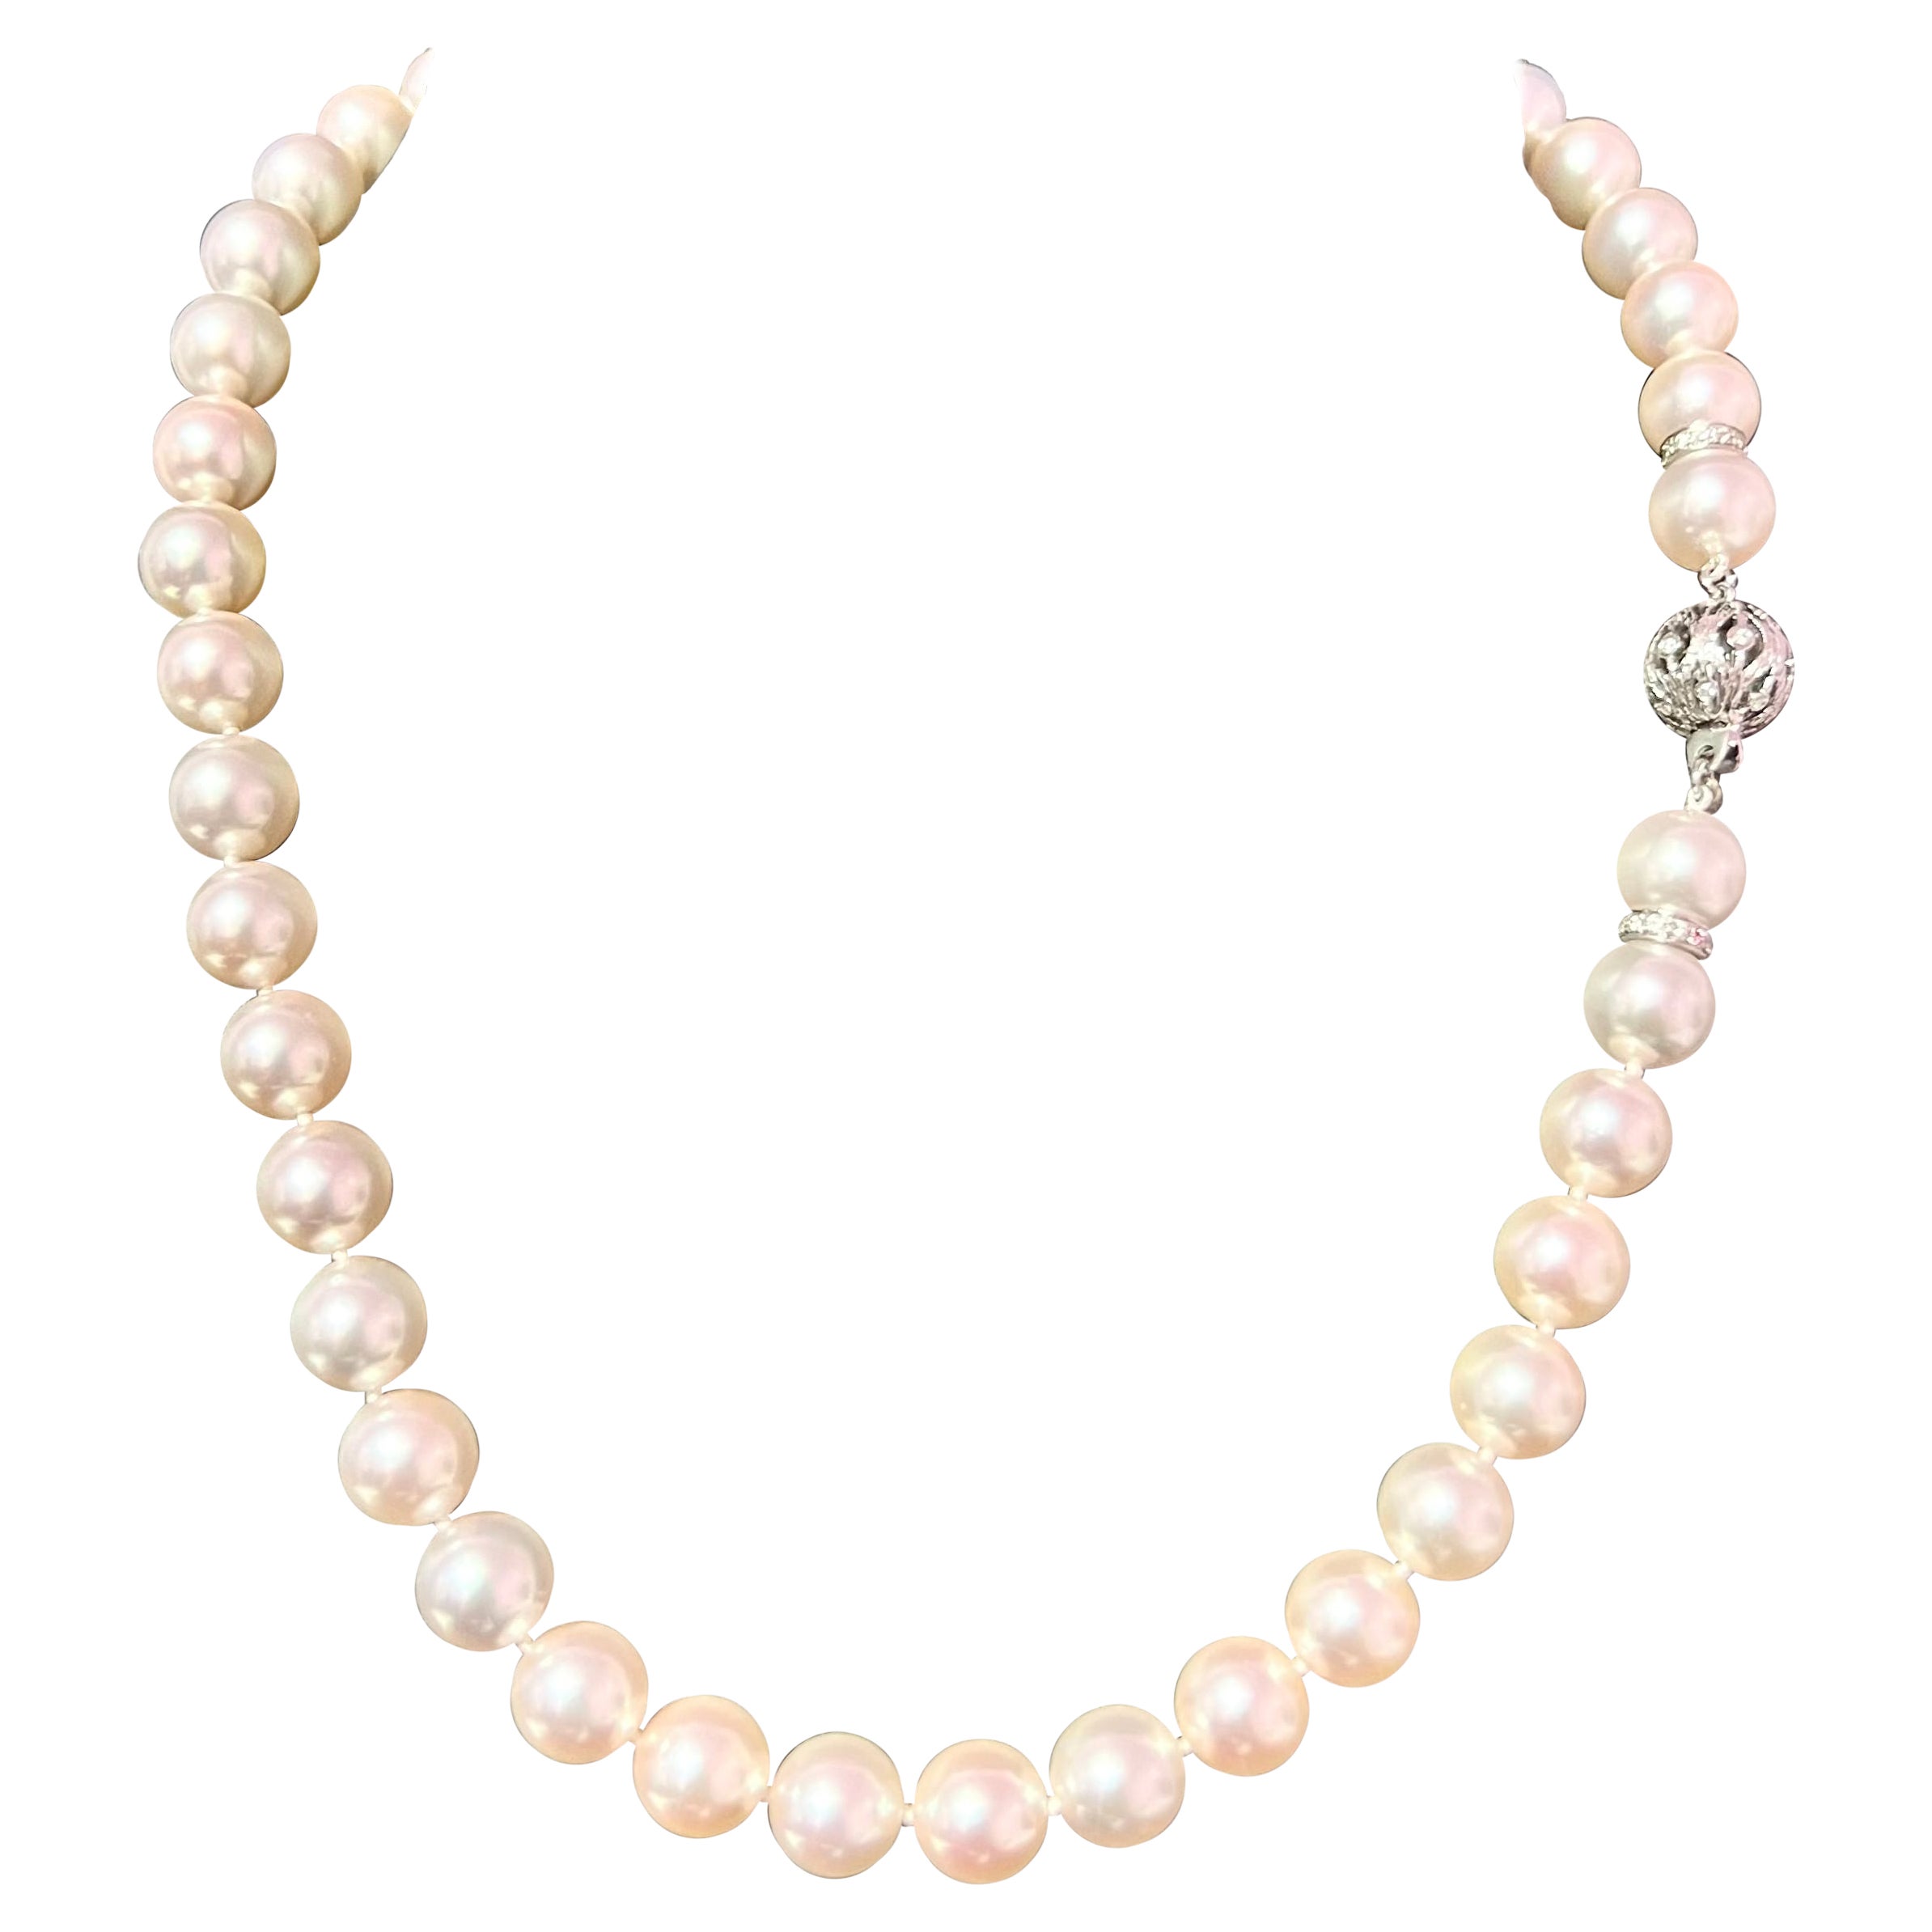 Akoya Pearl Necklace 14k White Gold 16.25